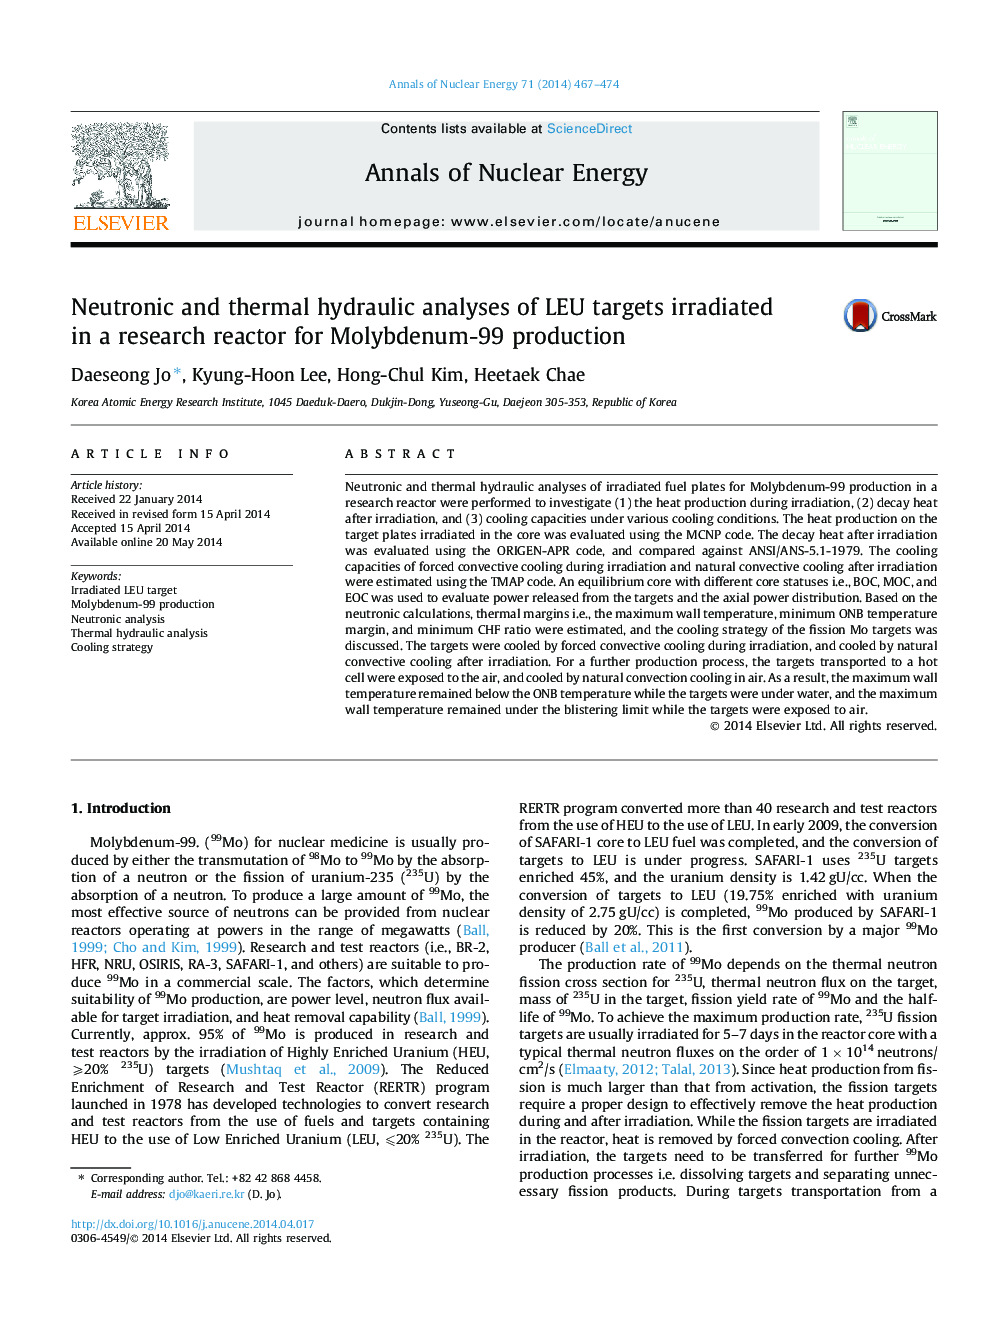 Neutronic and thermal hydraulic analyses of LEU targets irradiated in a research reactor for Molybdenum-99 production